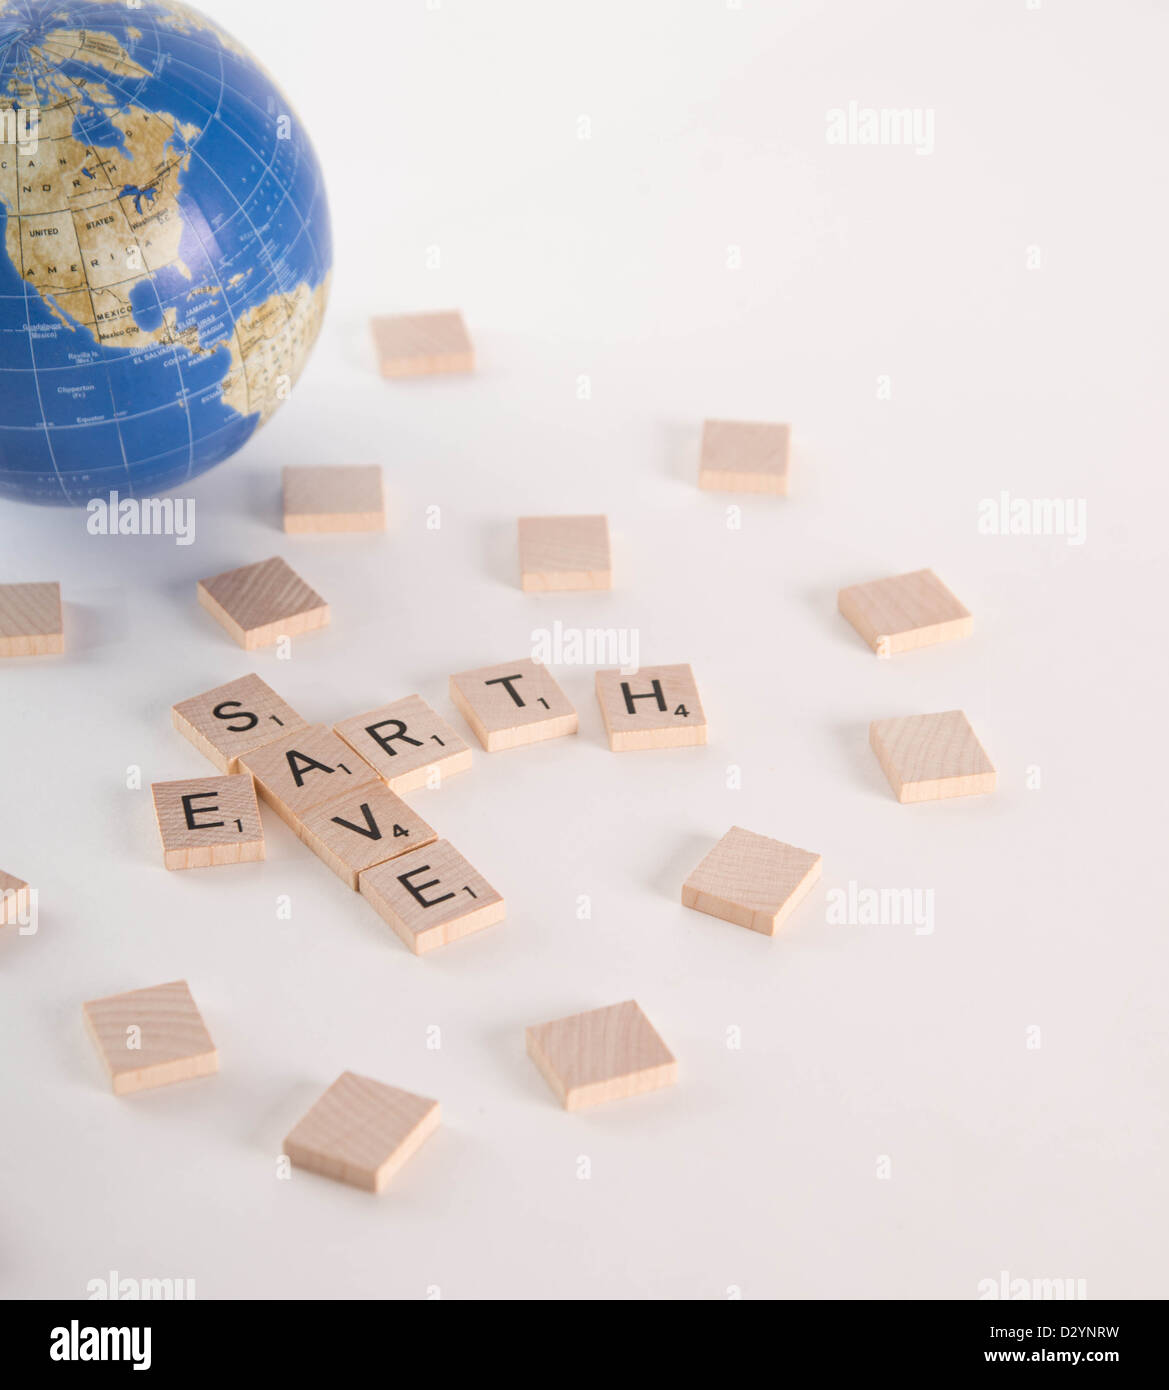 Save Earth concept spelled out in Scrabble letters with out of focus world globe in the background. Isolated on white background Stock Photo